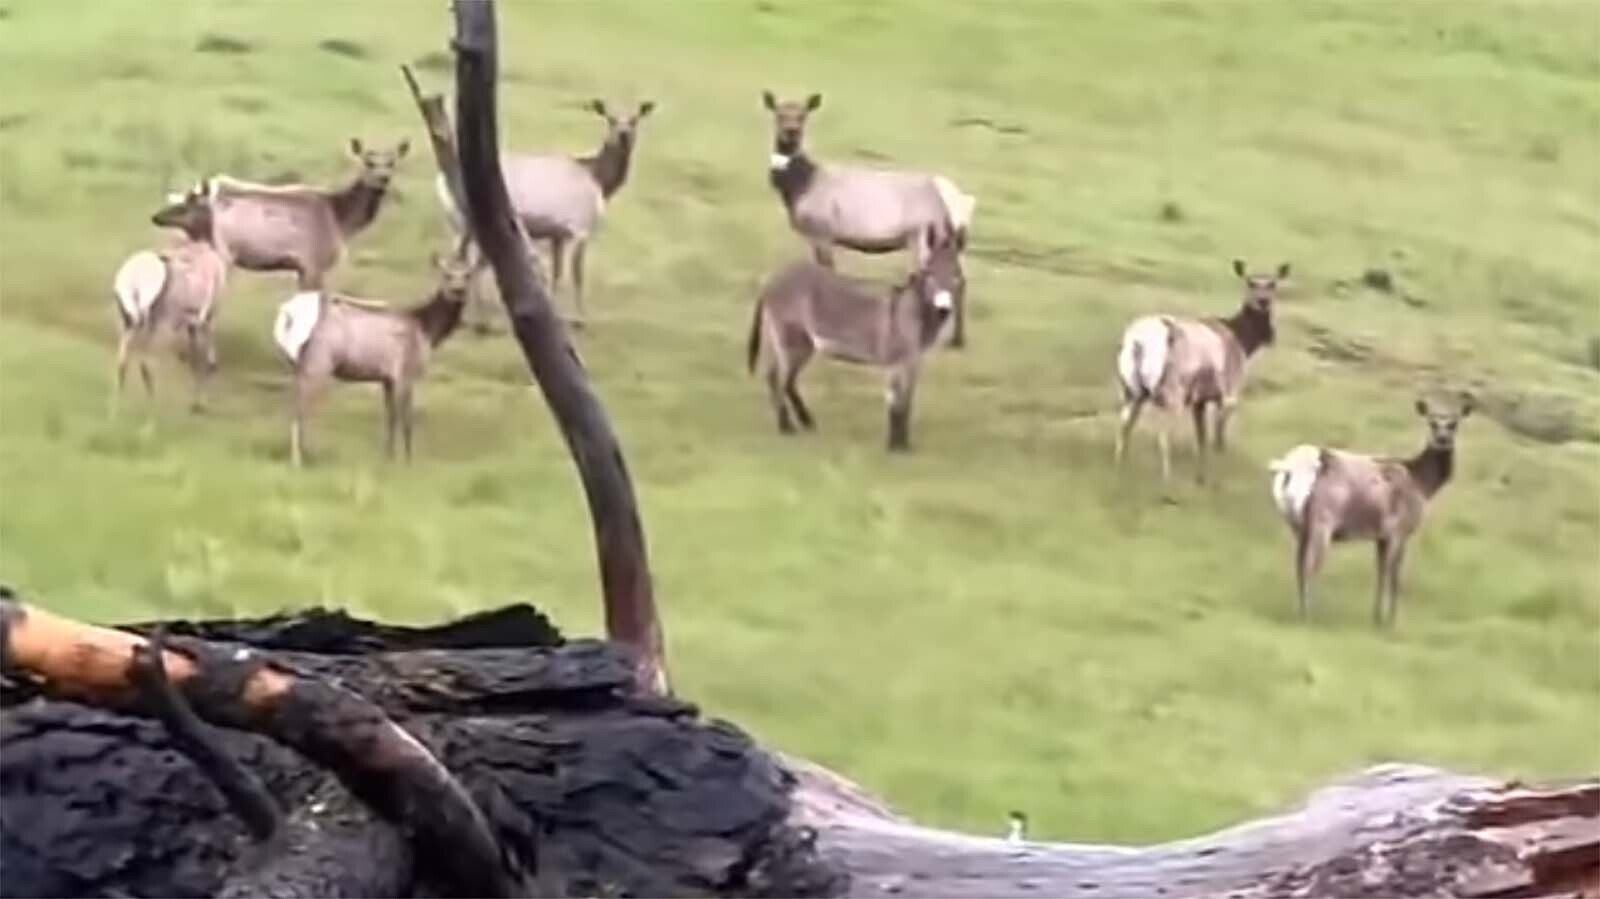 Diesel the donkey ran away from his home five years ago and turned up again this spring when a hunter captured this video of him living with a herd of elk in California. Despite numerous online rumors, Diesel isn't from Wyoming and was never in the Cowboy State.